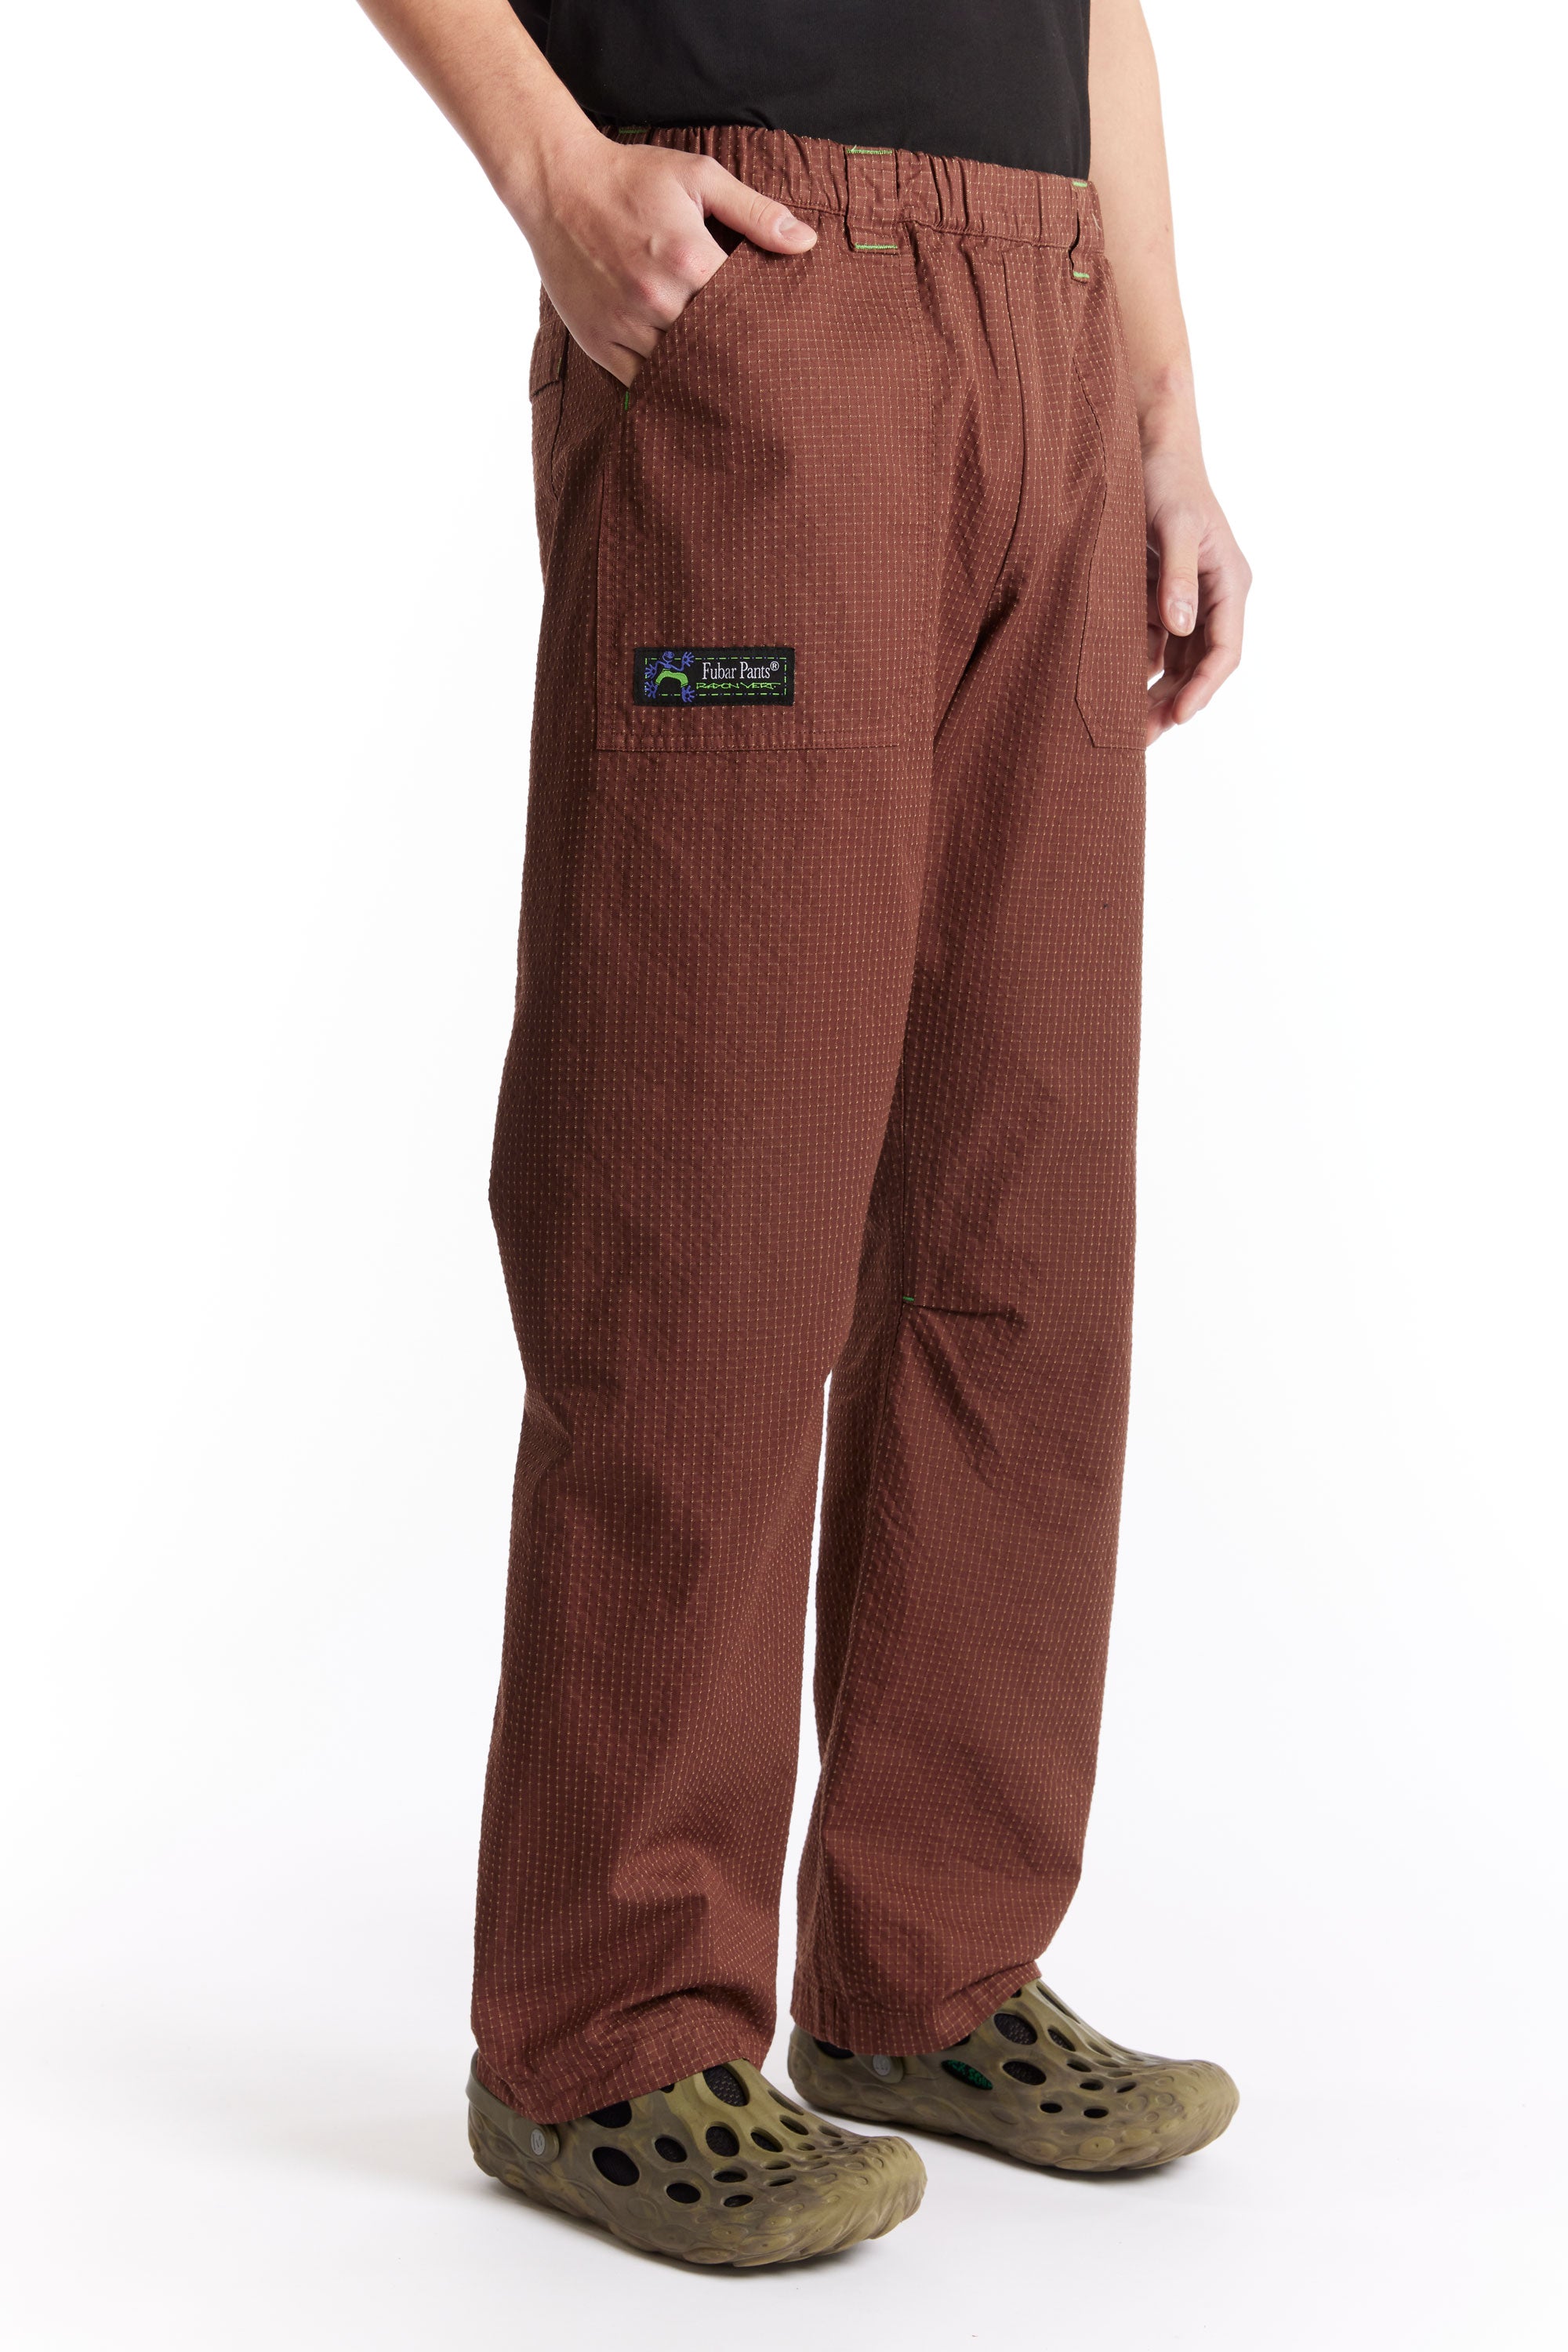 The RAYON VERT - FUBAR PANTS SS24  available online with global shipping, and in PAM Stores Melbourne and Sydney.